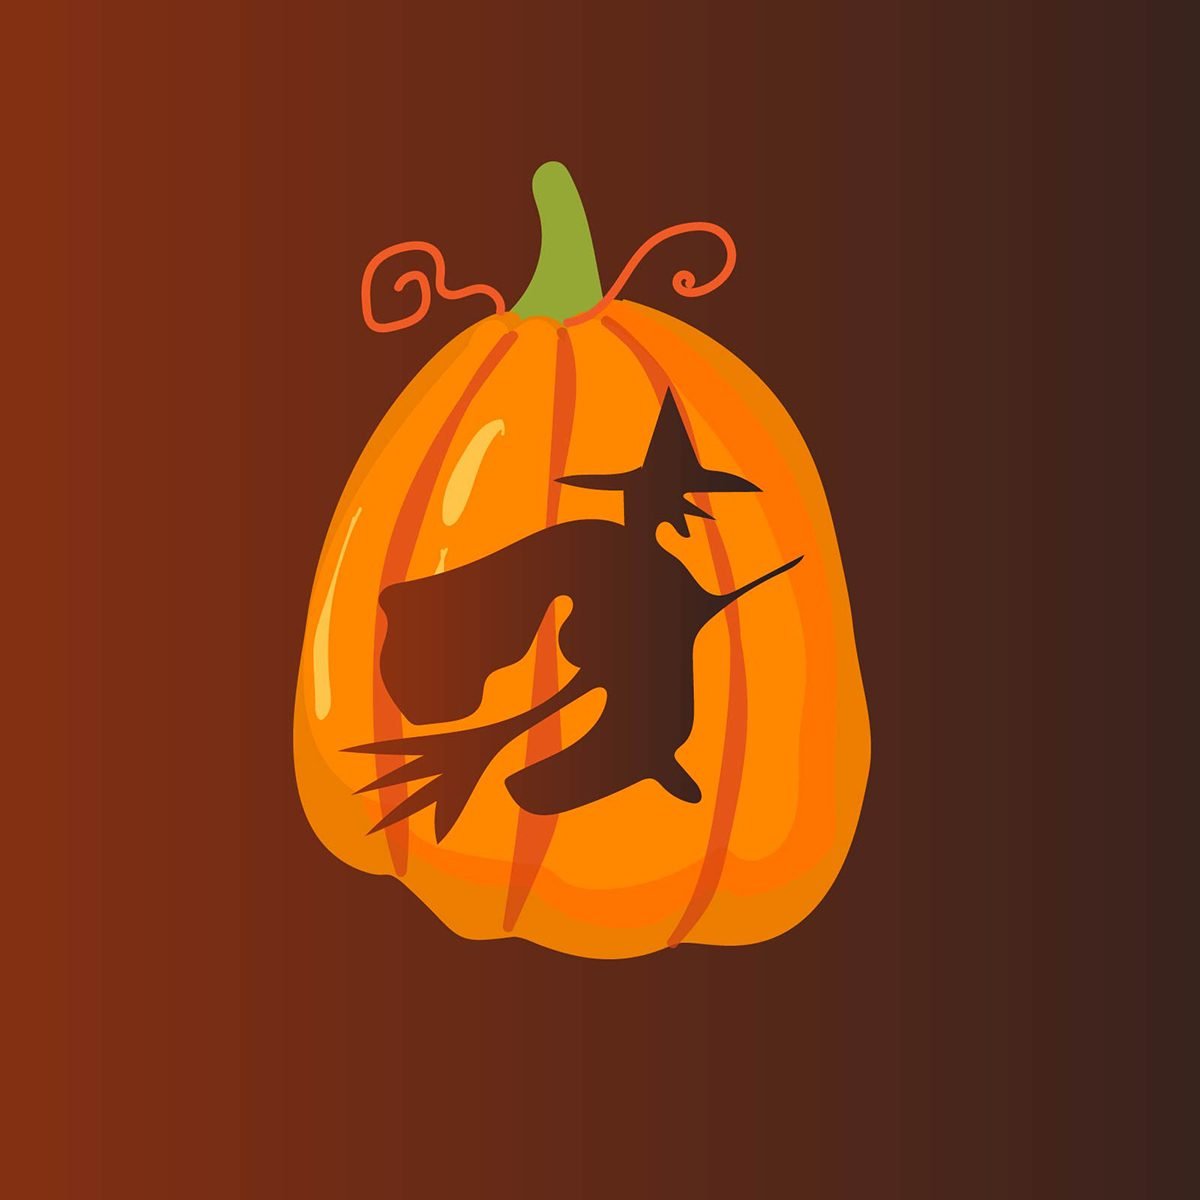 31 Free Pumpkin Carving Stencils to Take Your JackoLantern to the